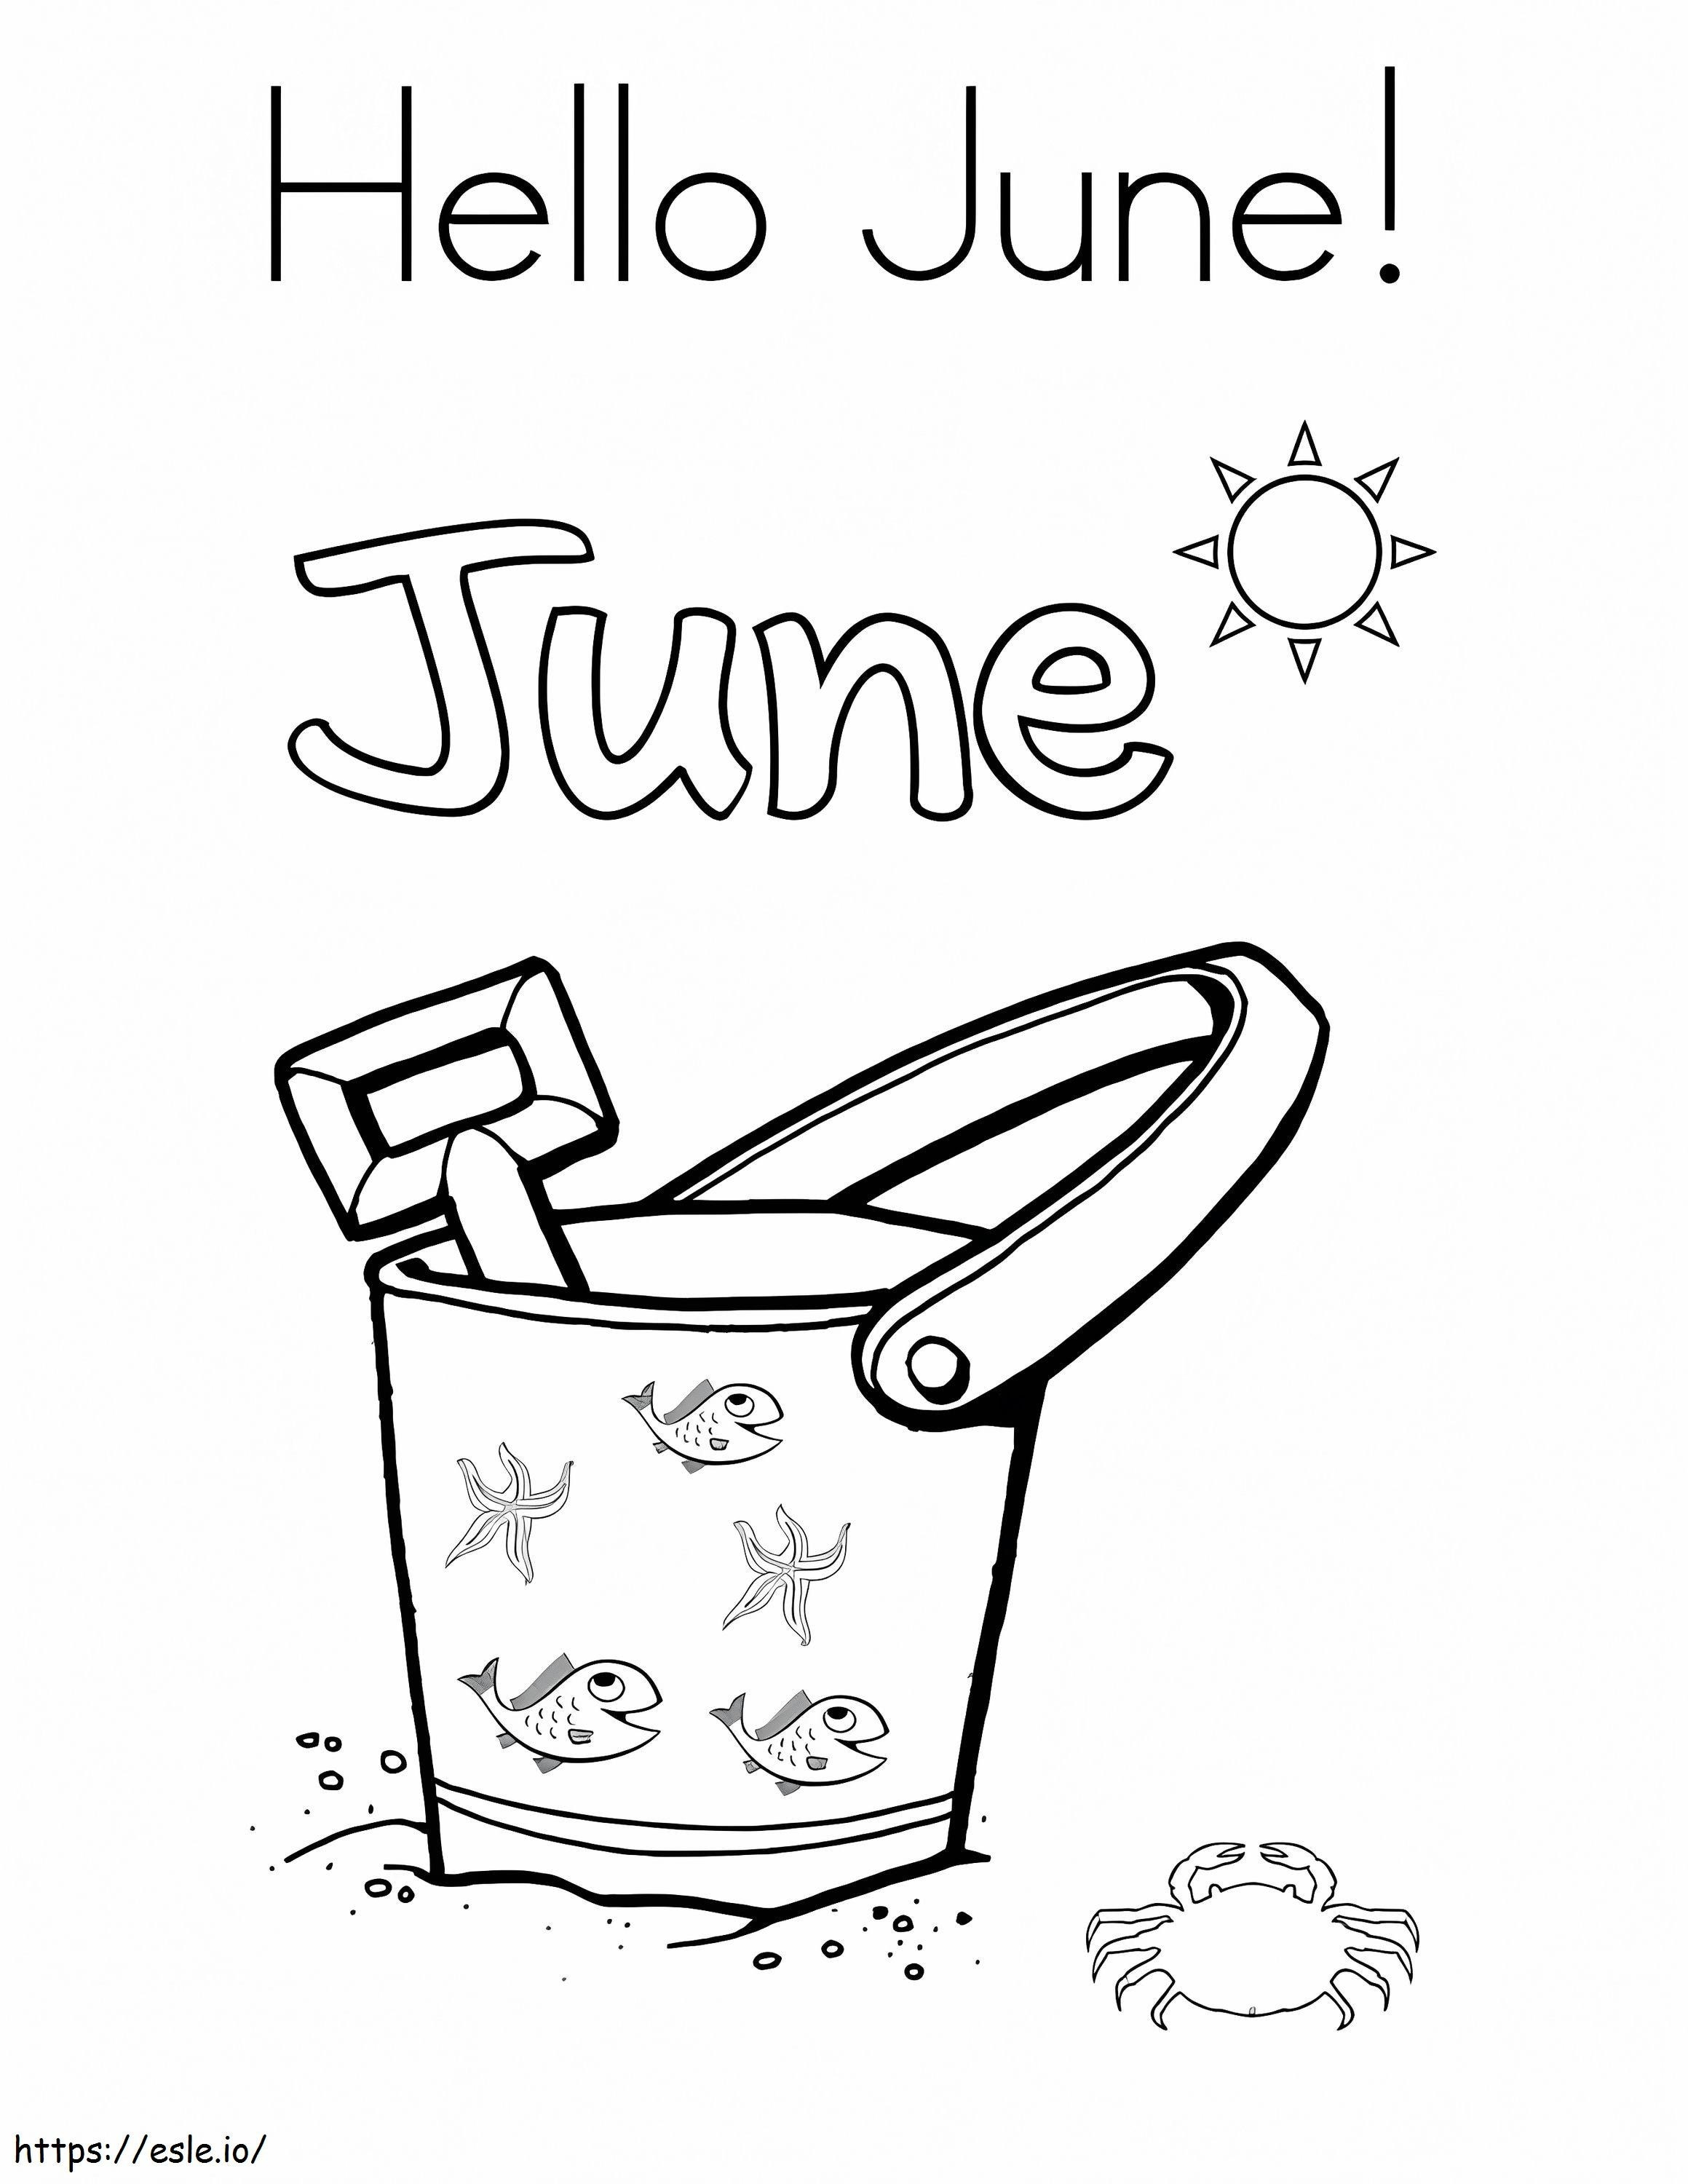 Hello June coloring page